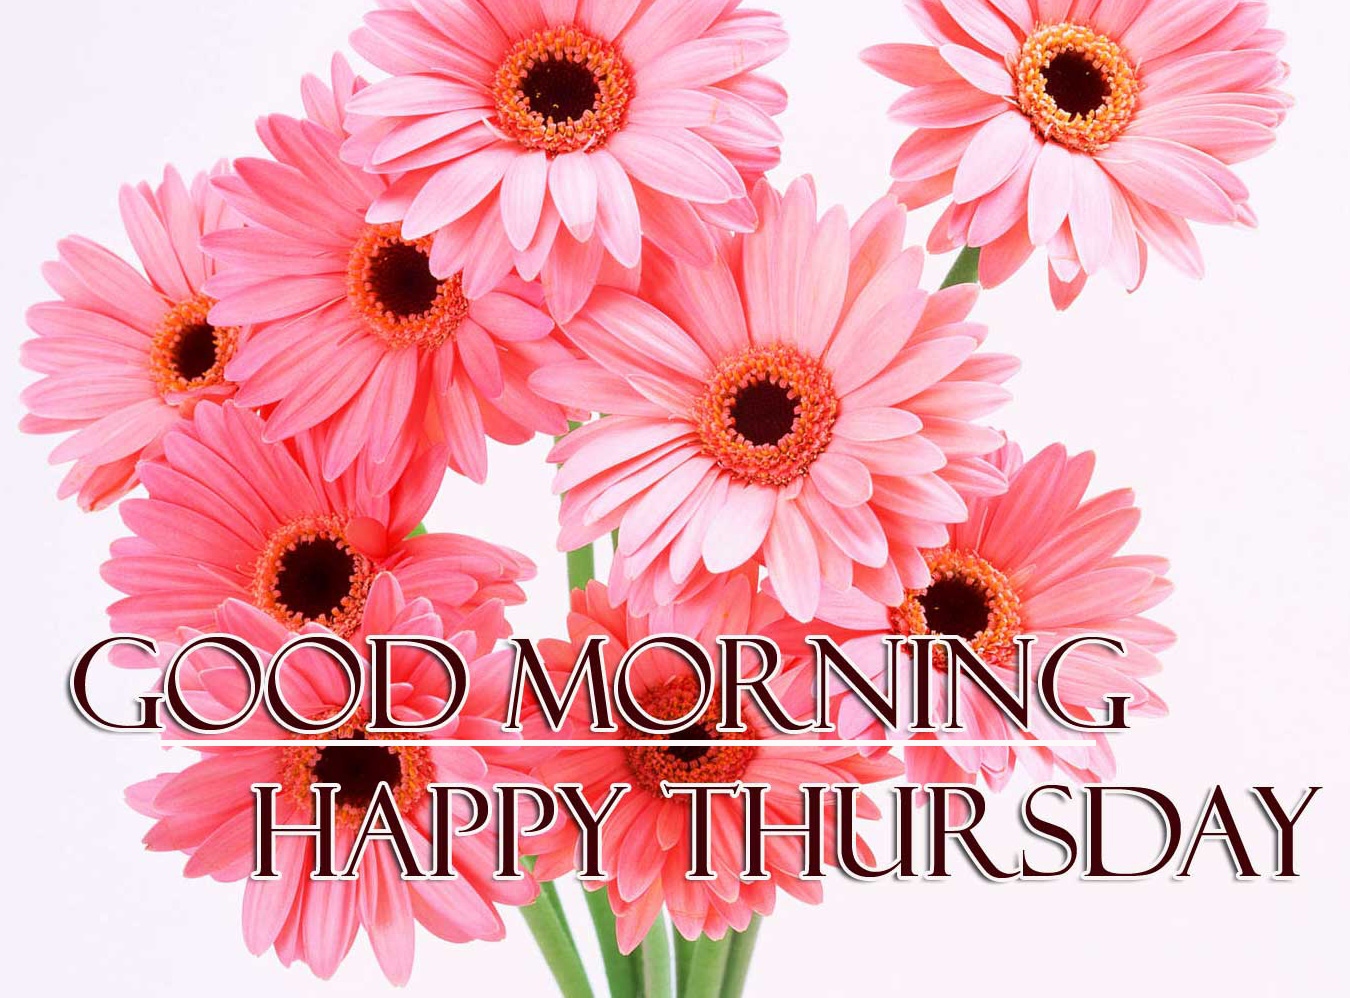 Good Morning Thursday Images Photo for Facebook